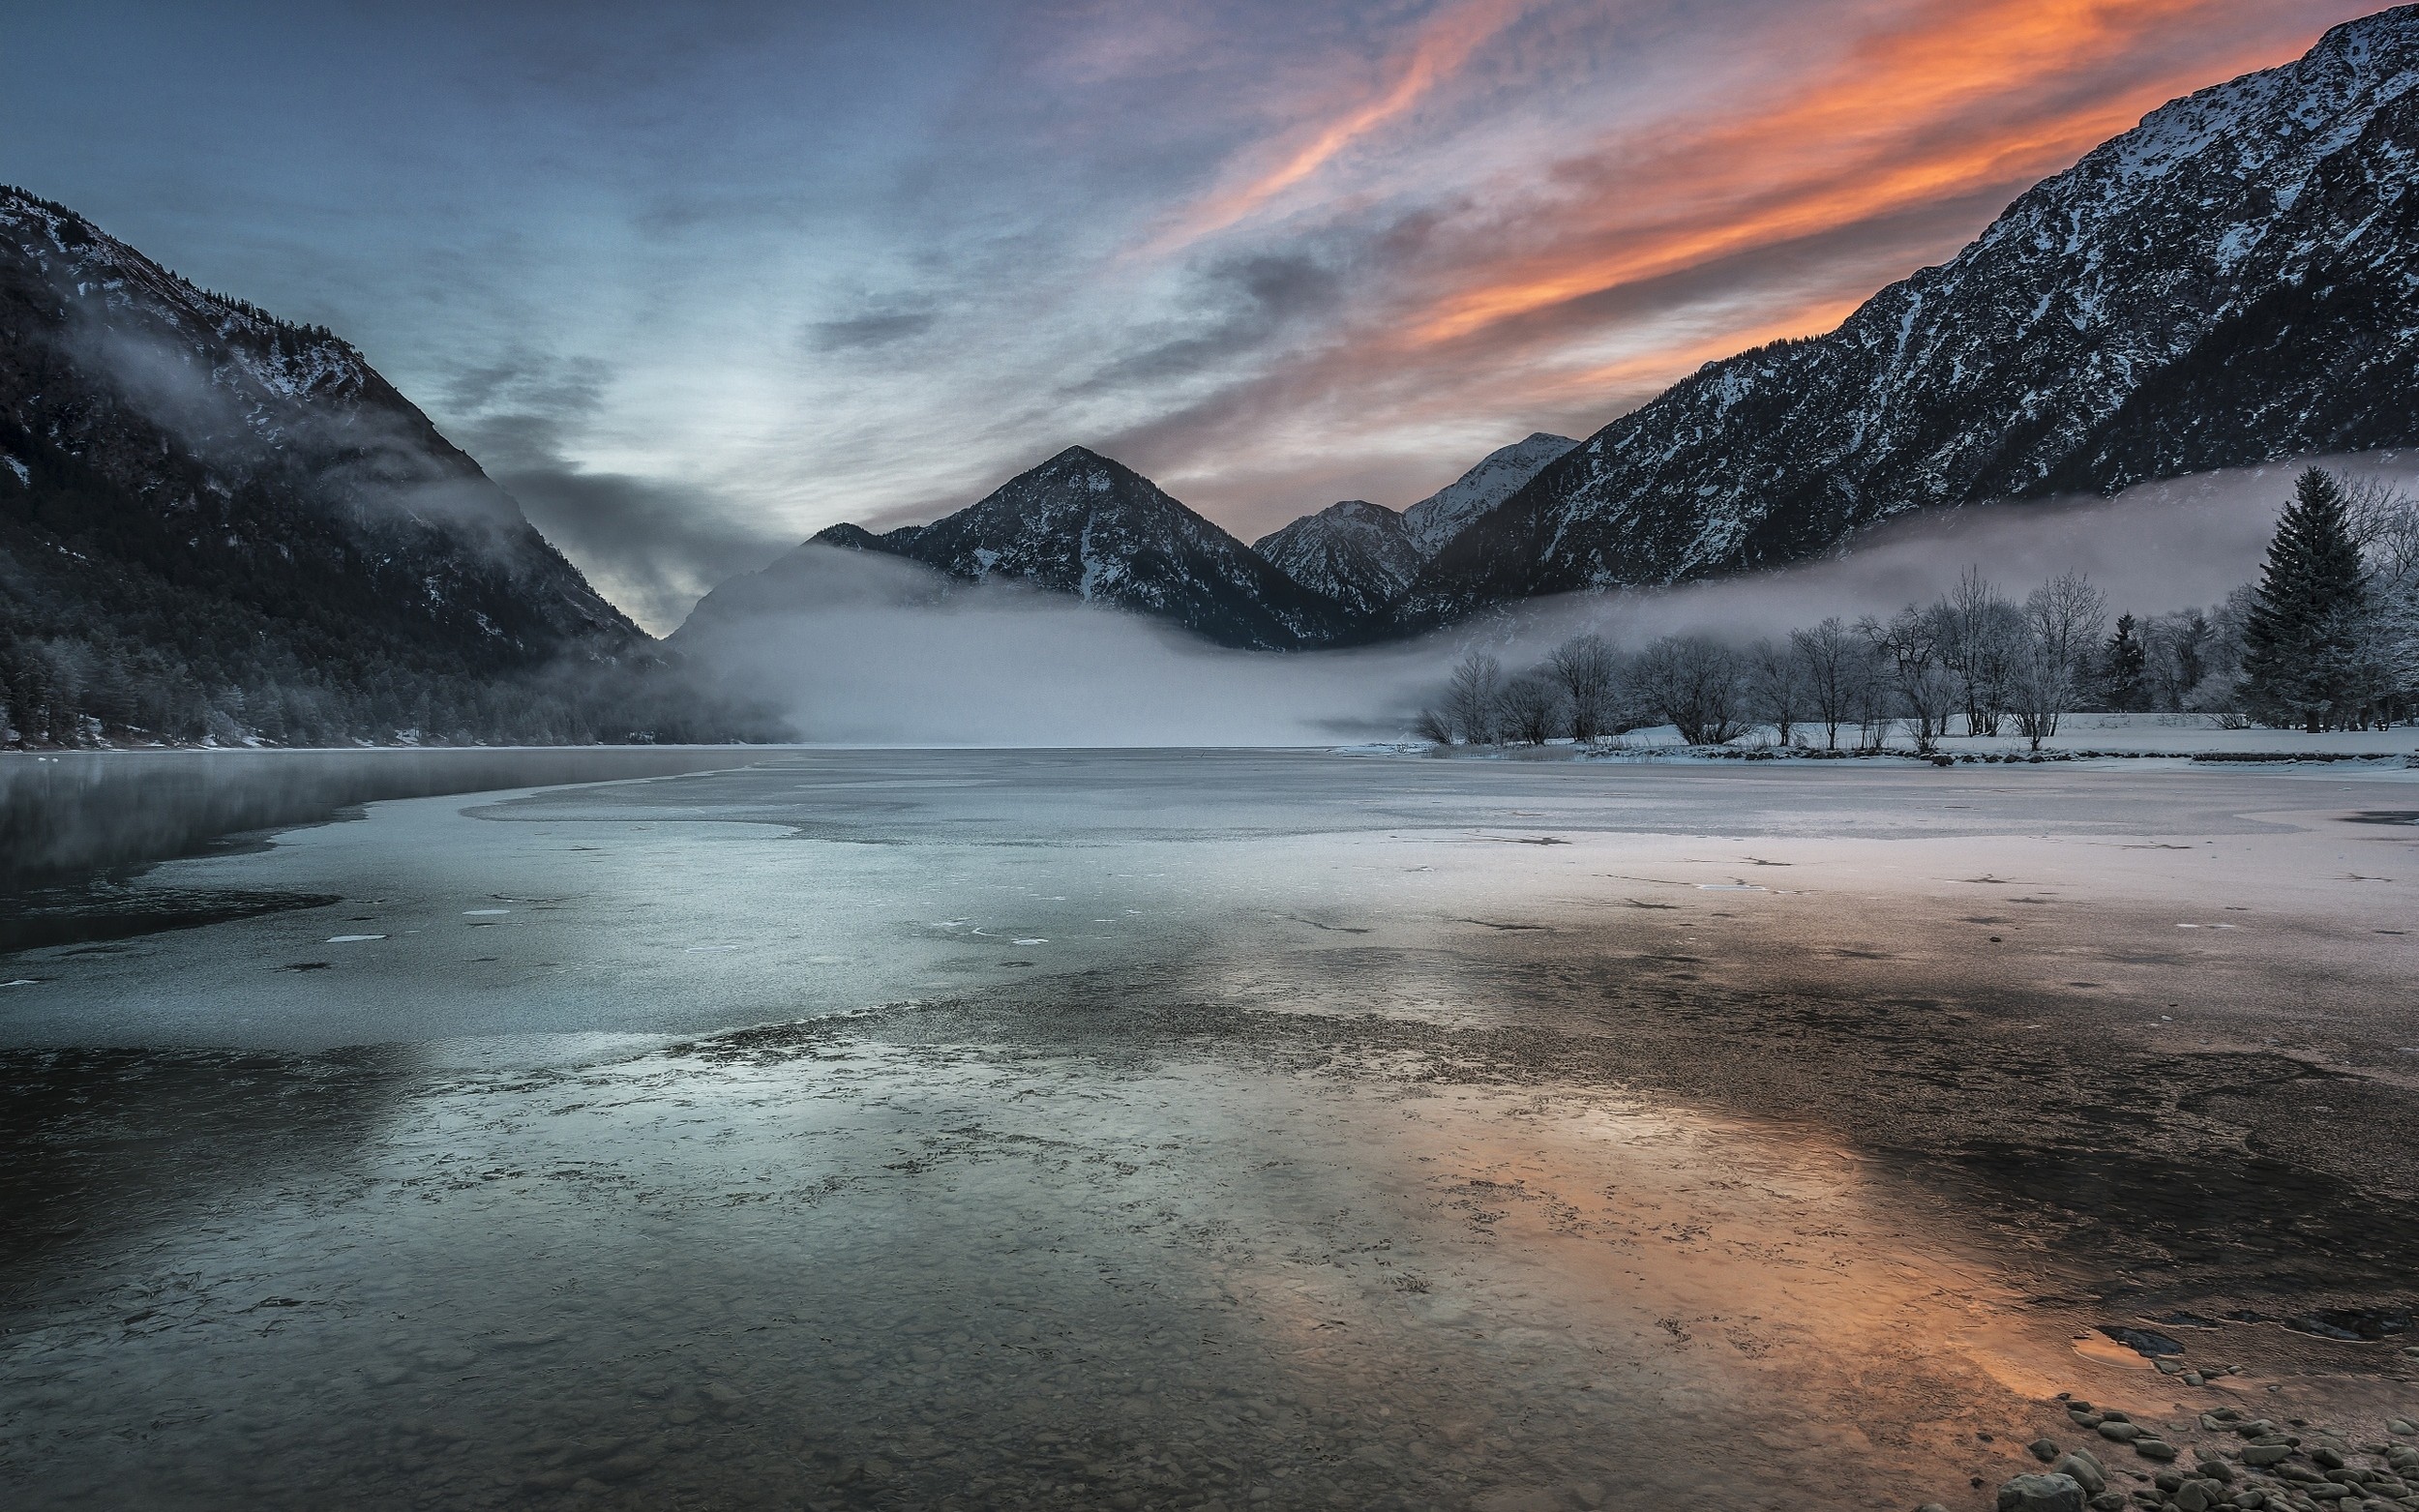 General 2500x1563 nature landscape lake mountains forest winter frost mist snow cold sky